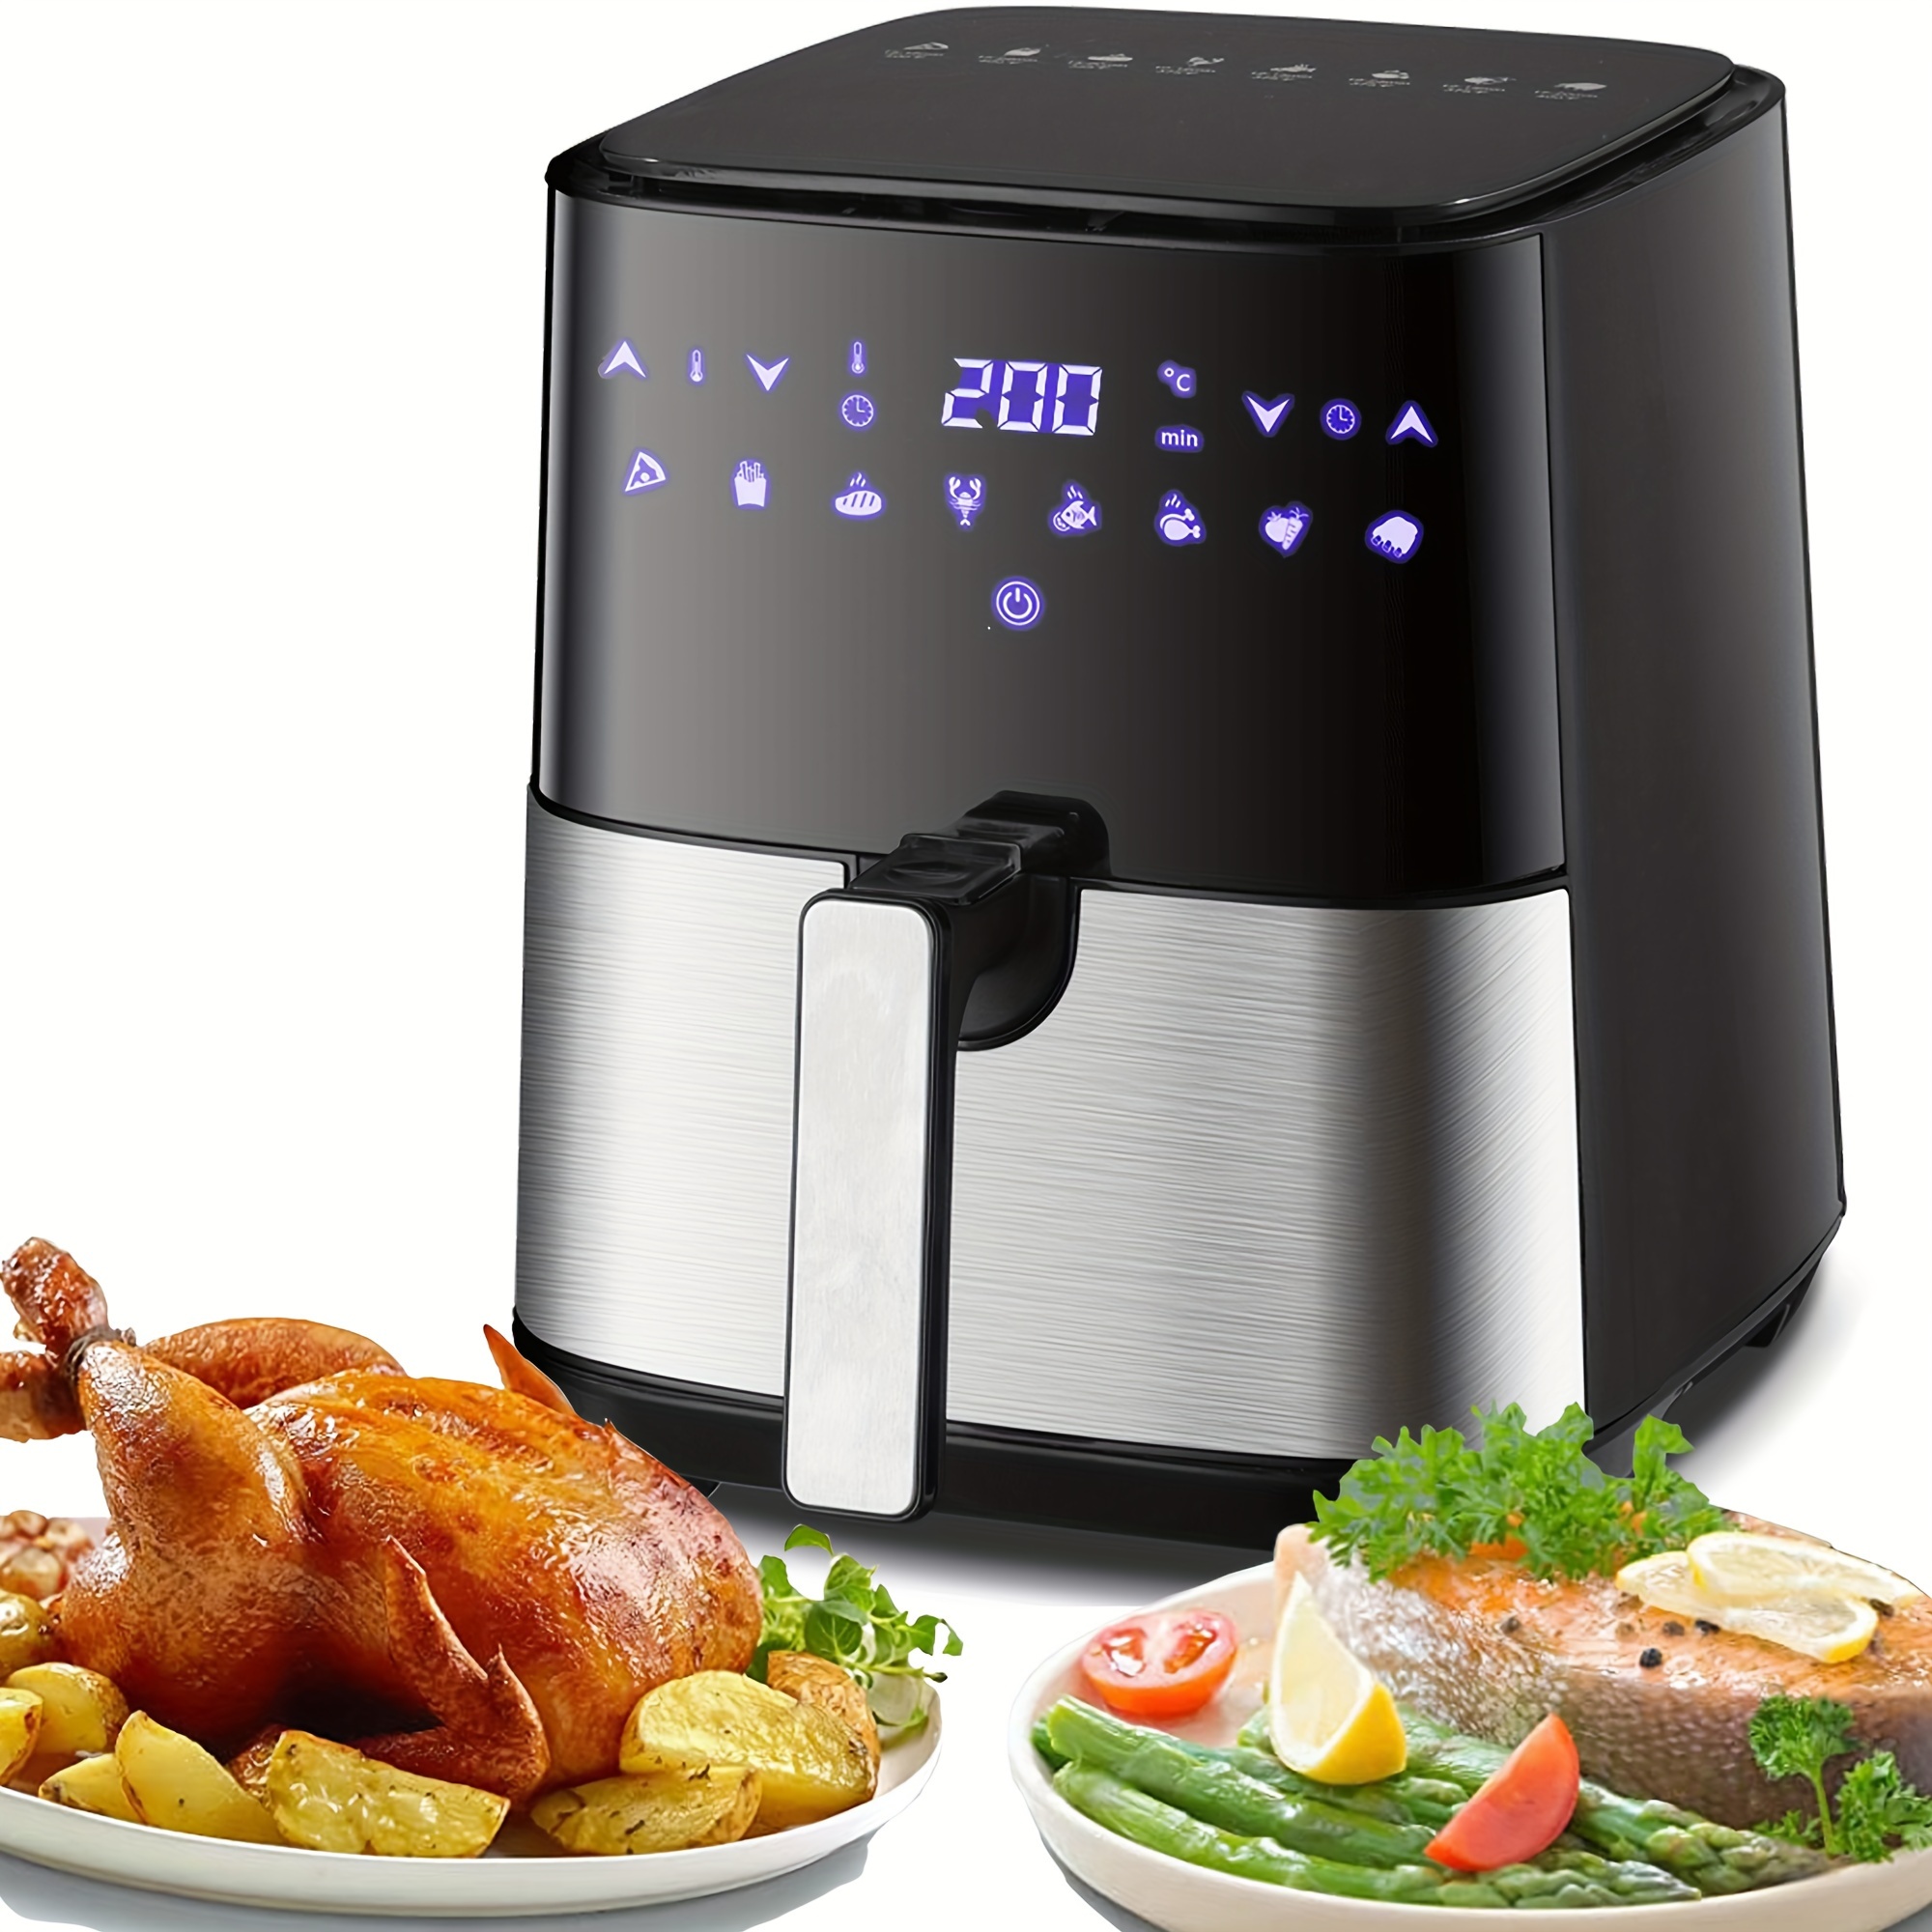 KitCook Large Air Fryer XL, 1500W 120V 6.8QT Stainless Steel Air Fryers  Oven, Nonstick Basket, LED Touch Screen, 8 Presets Menus, Dishwasher Safe  for Roaste/Bake/Grill with Racks & Skewers Recipes